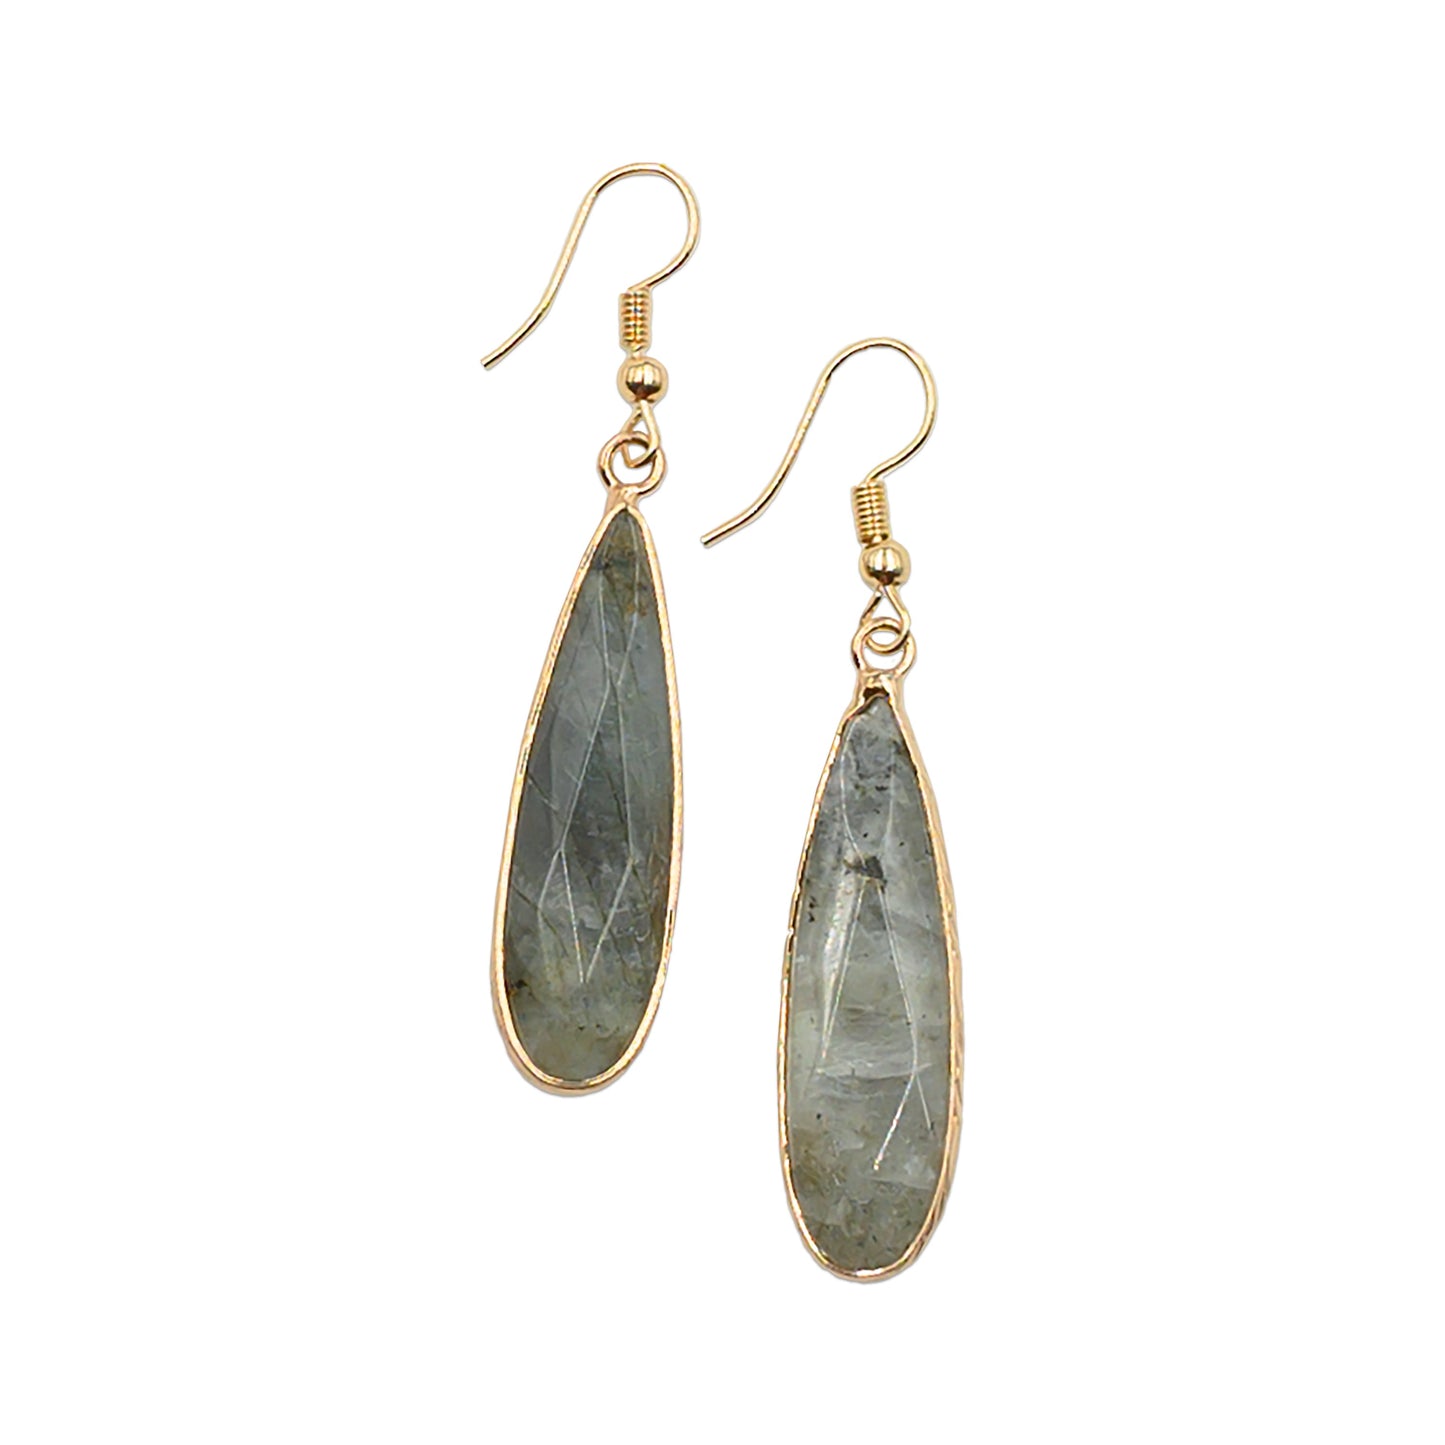 Darcy Collection - Haze Earrings